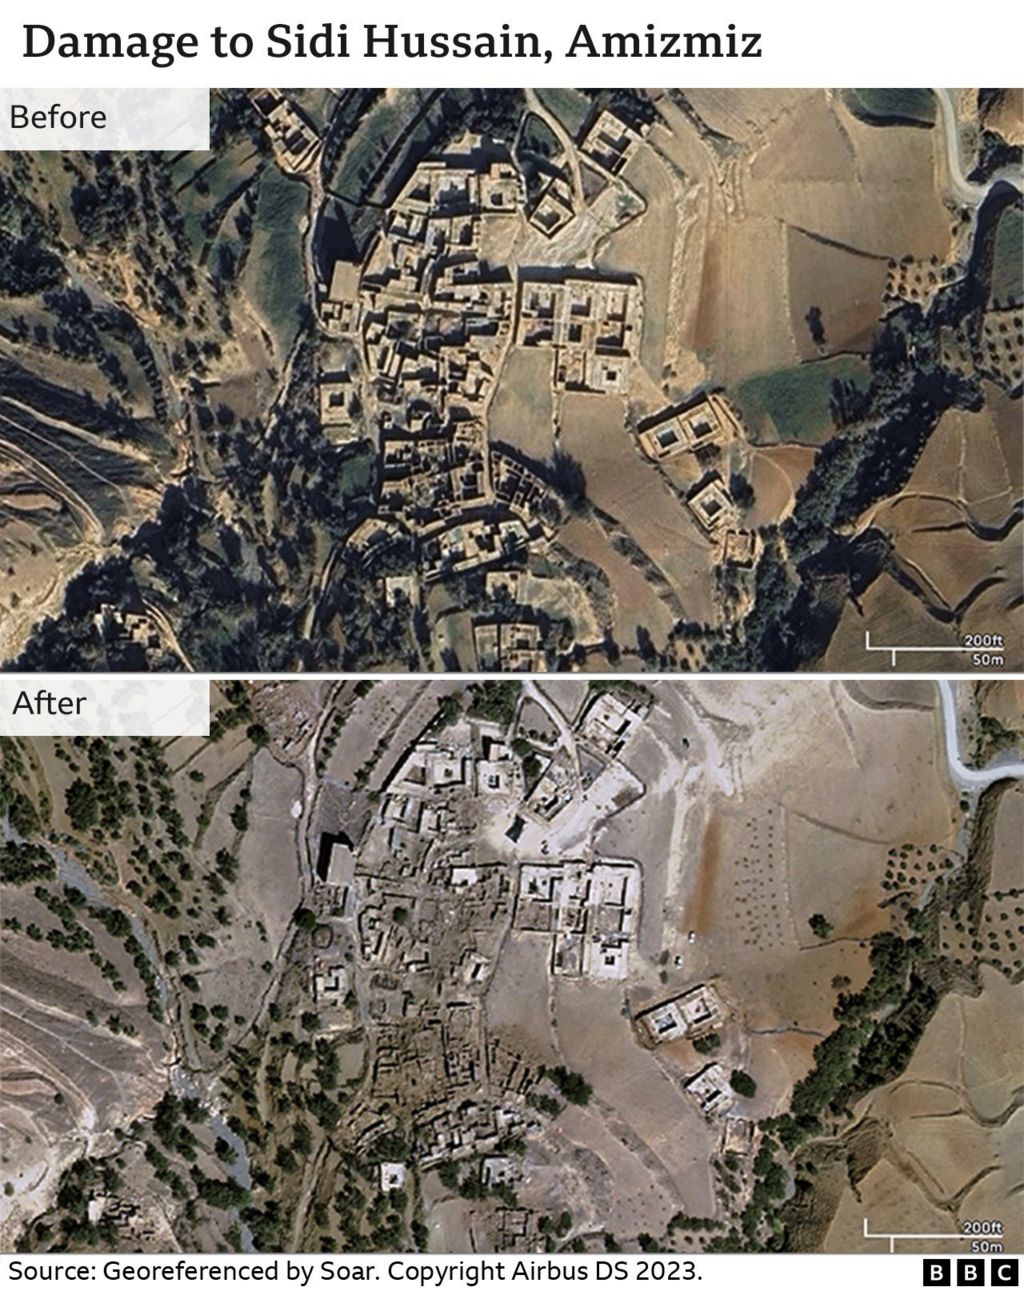 Before and after images of the town of SidiHussian, Amizmiz